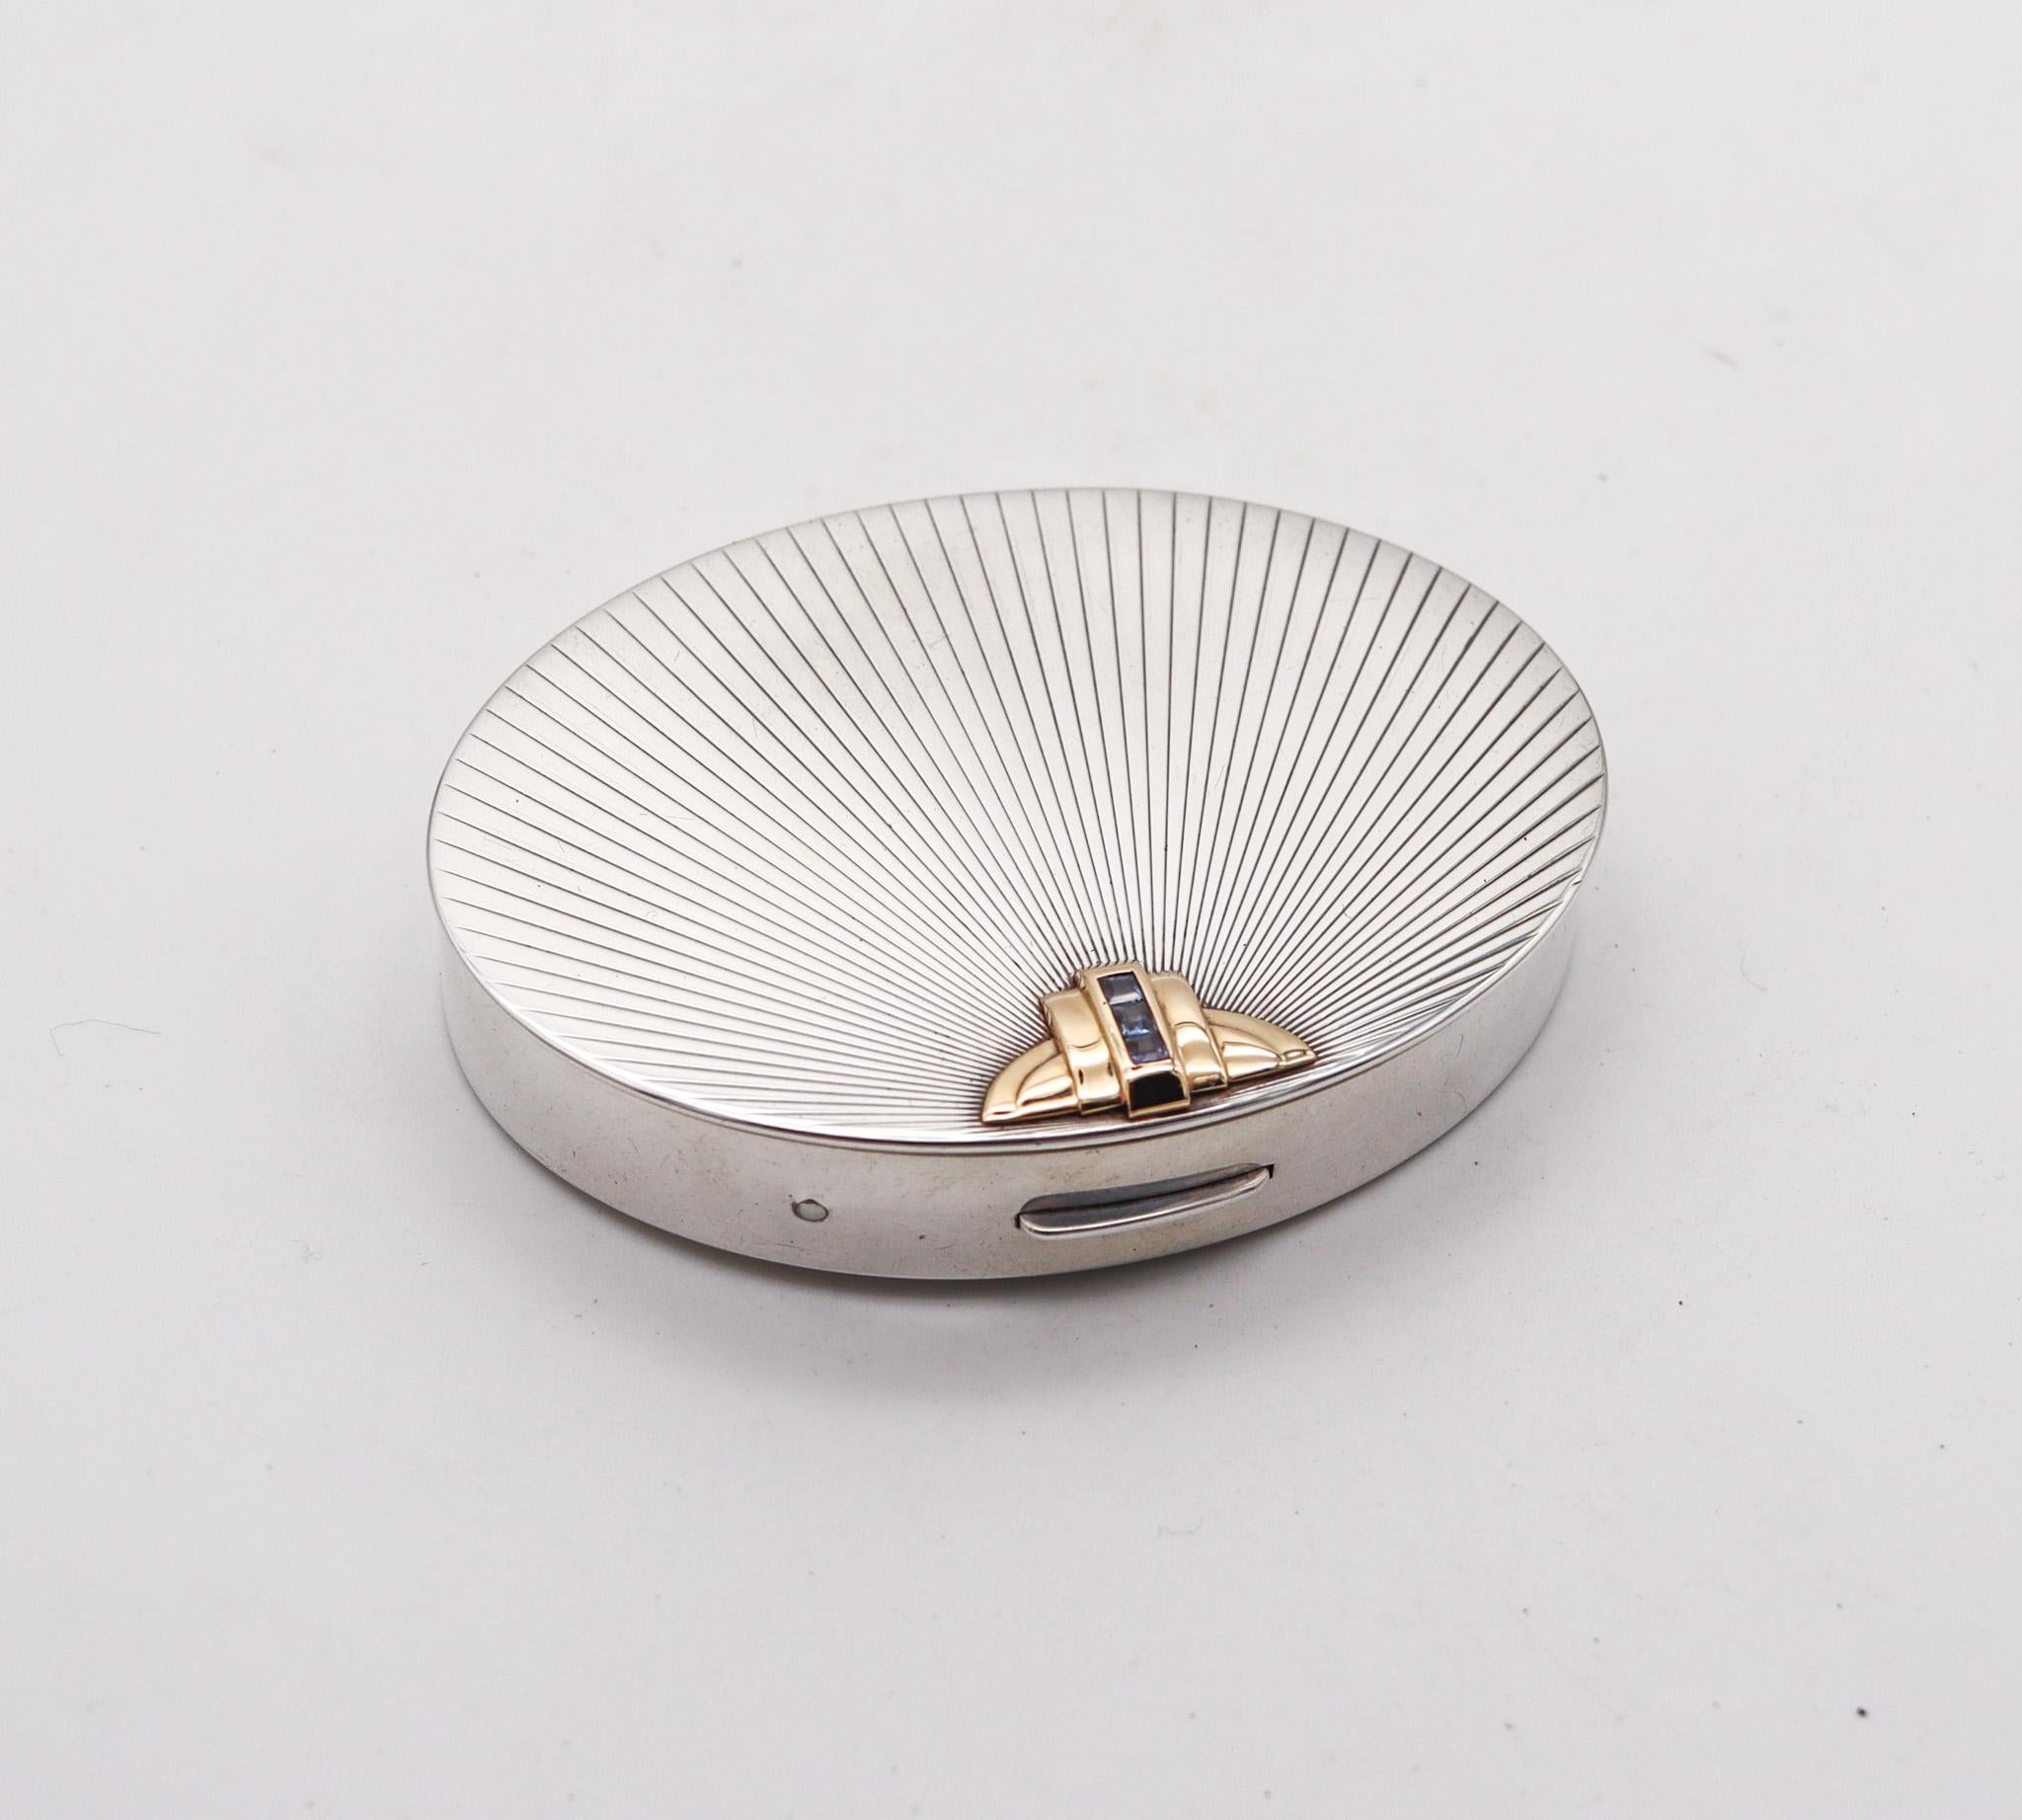 Art deco oval pill box designed by Tiffany & Co.

Very nice oval box, created in New York city at the Tiffany Studios, back in the late 1930's. This box has been crafted in solid .925/.999 sterling silver with an applique in yellow gold of 14